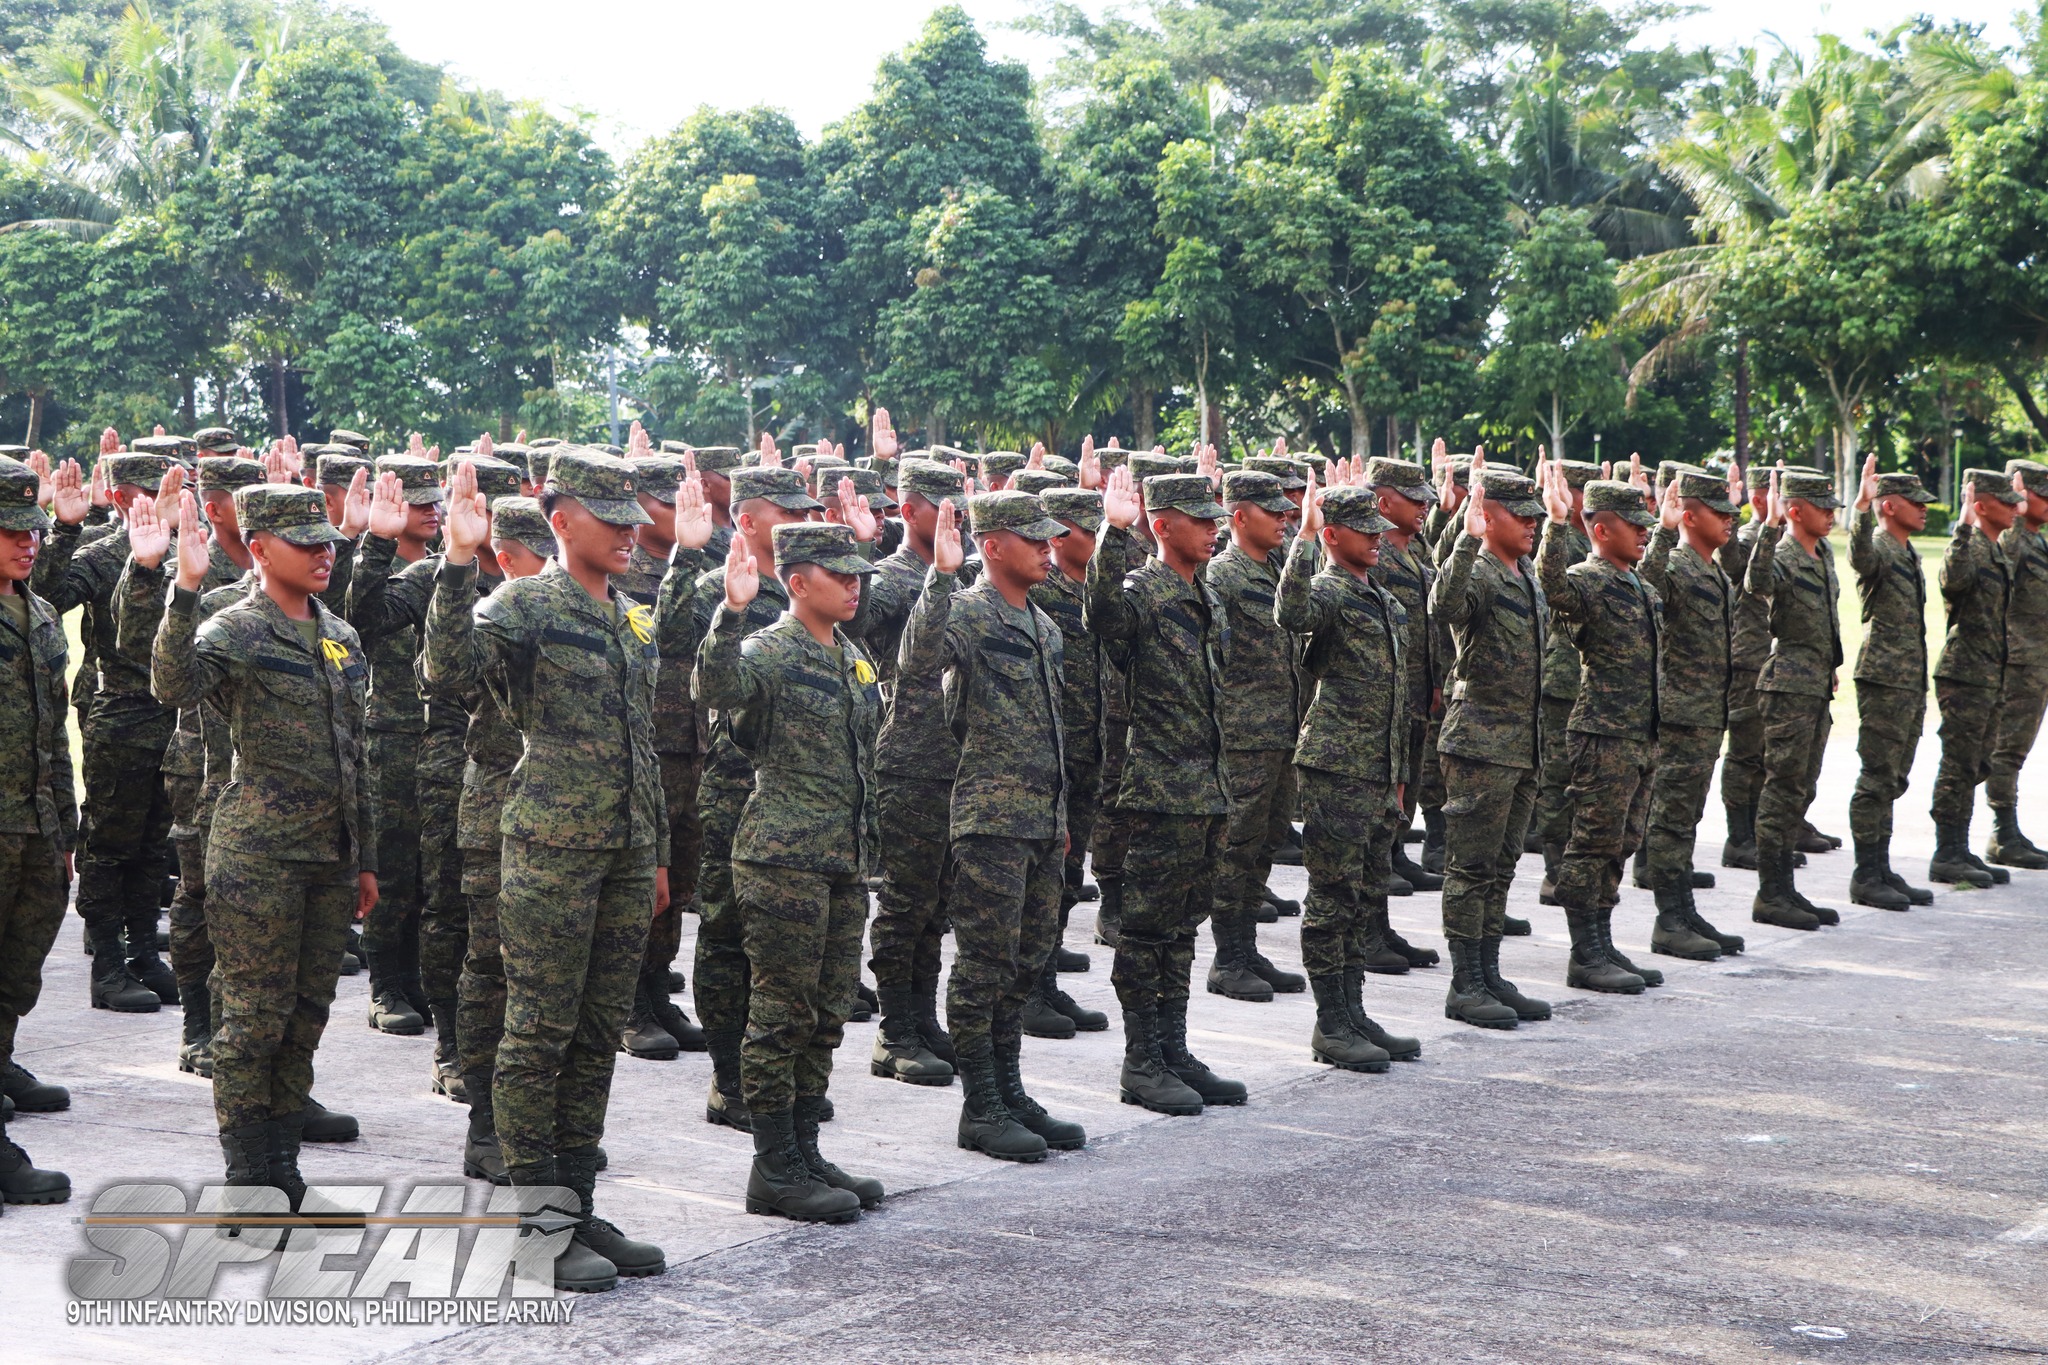 Spear Division Welcomes New Competent, Confident, and Capable Army Privates